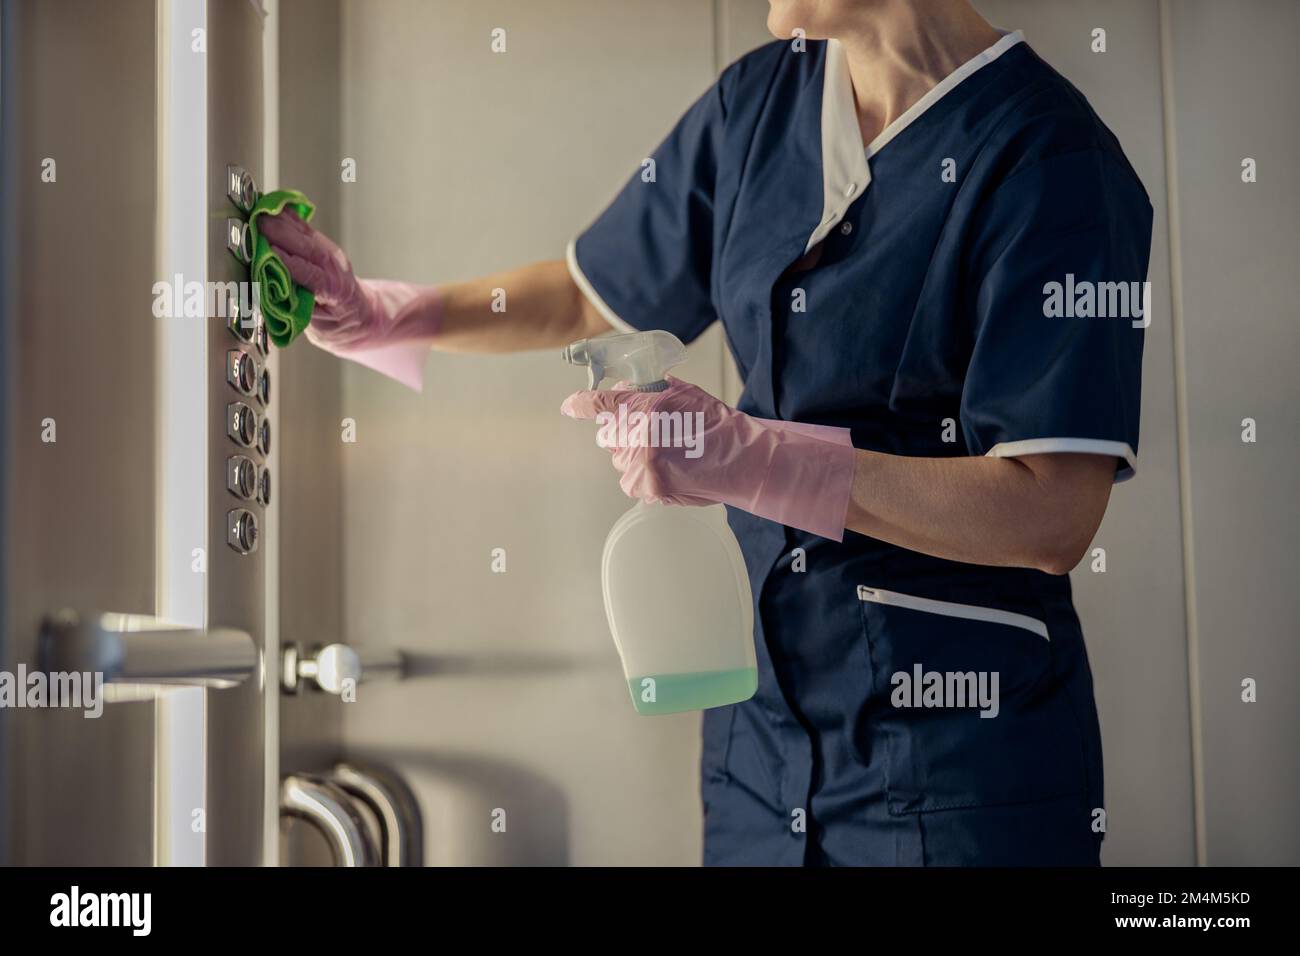 Close up of chambermaid wearing uniform and gloves cleaning elevator with detergent and rag Stock Photo